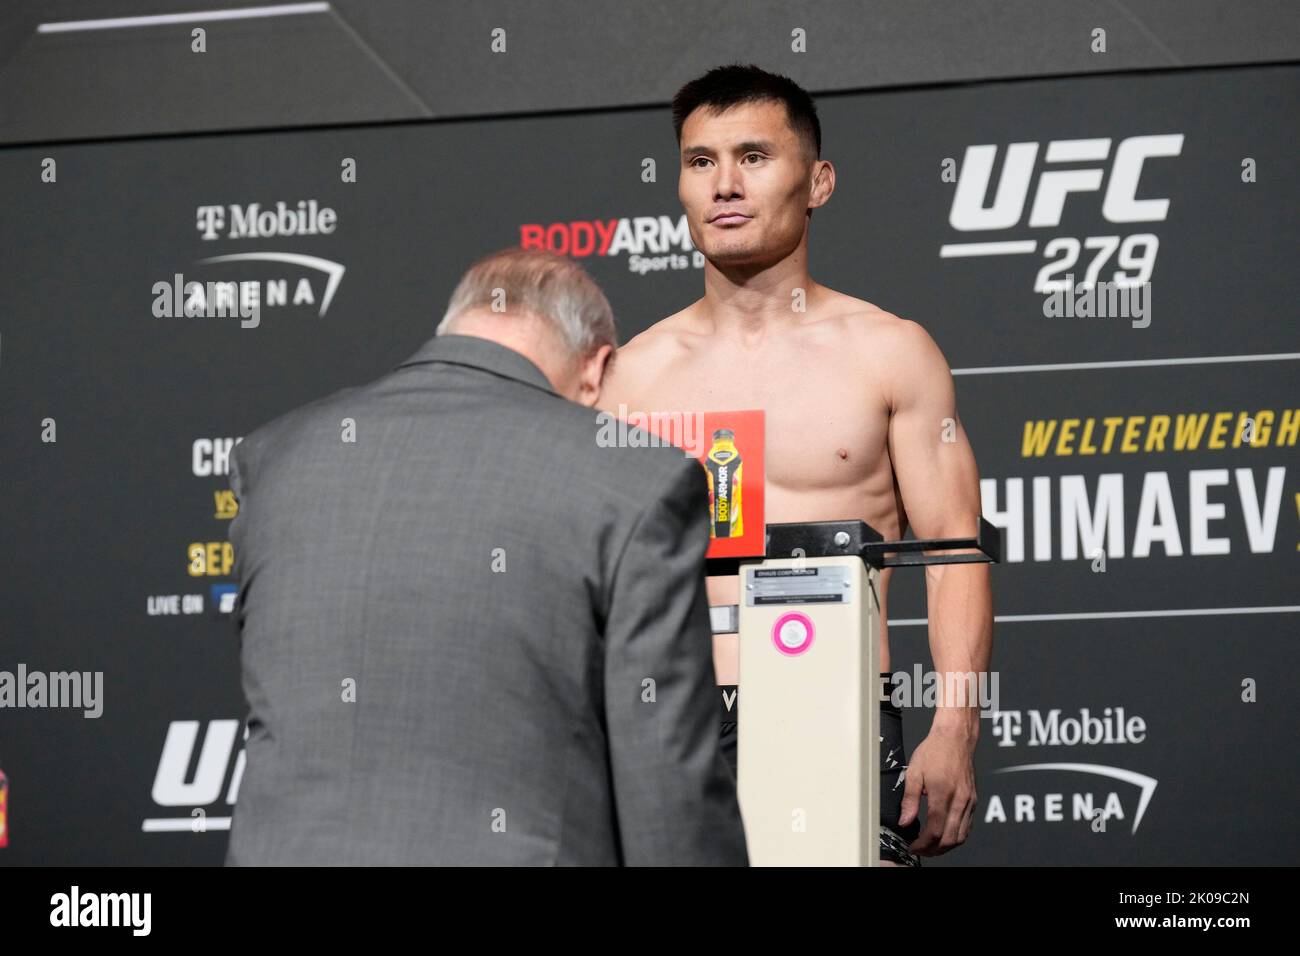 LAS VEGAS, NV - September 9: Alateng Heili  steps on the scale for the official weigh-ins at MGM Grand Garden Arena for UFC 279 - Chimaev vs Diaz - Official Weigh-in on September 9, 2022 in Las Vegas, NV, United States. (Photo by Louis Grasse/PxImages) Stock Photo